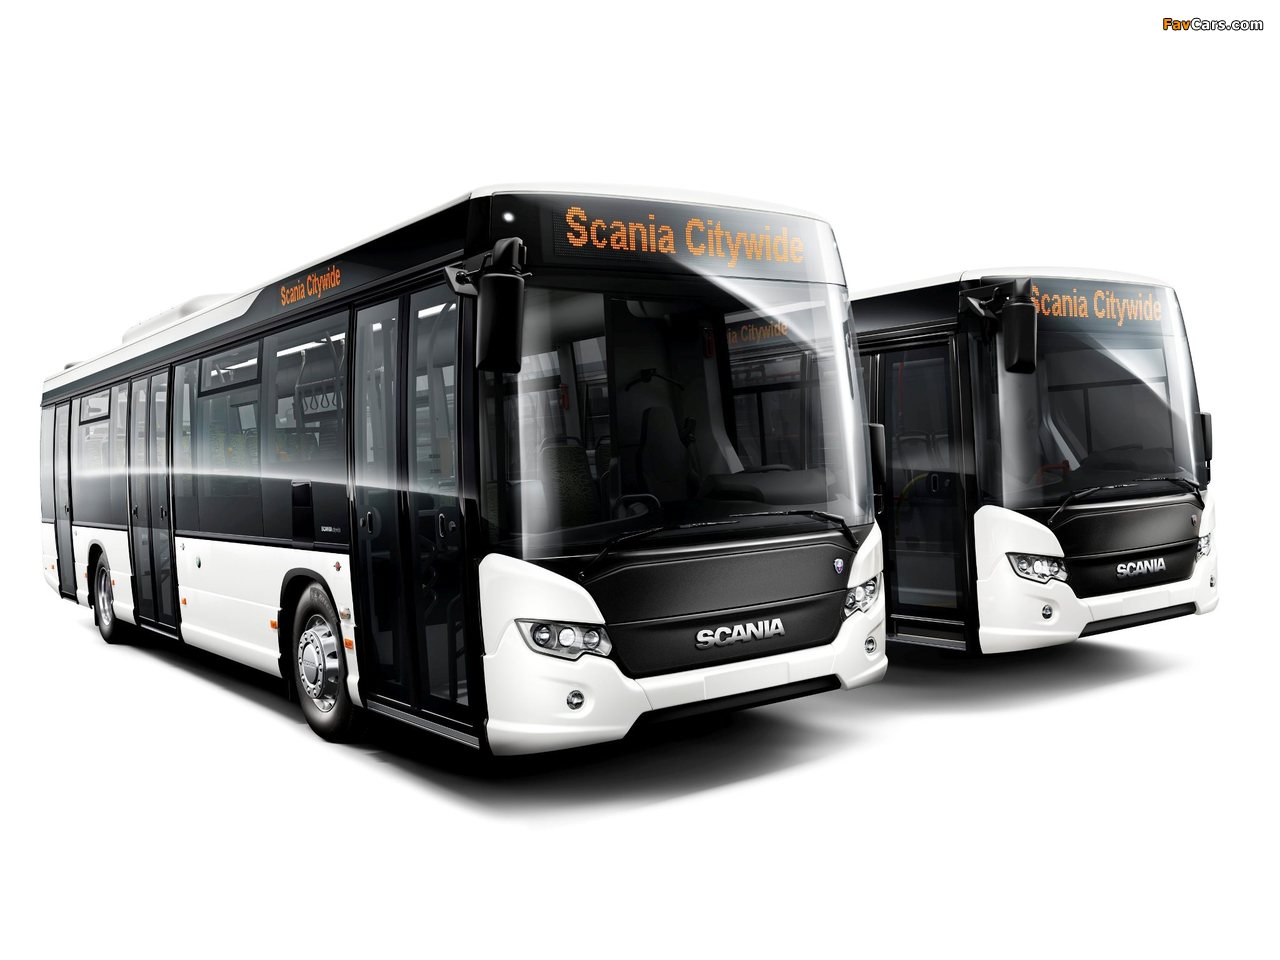 Scania Citywide images (1280 x 960)